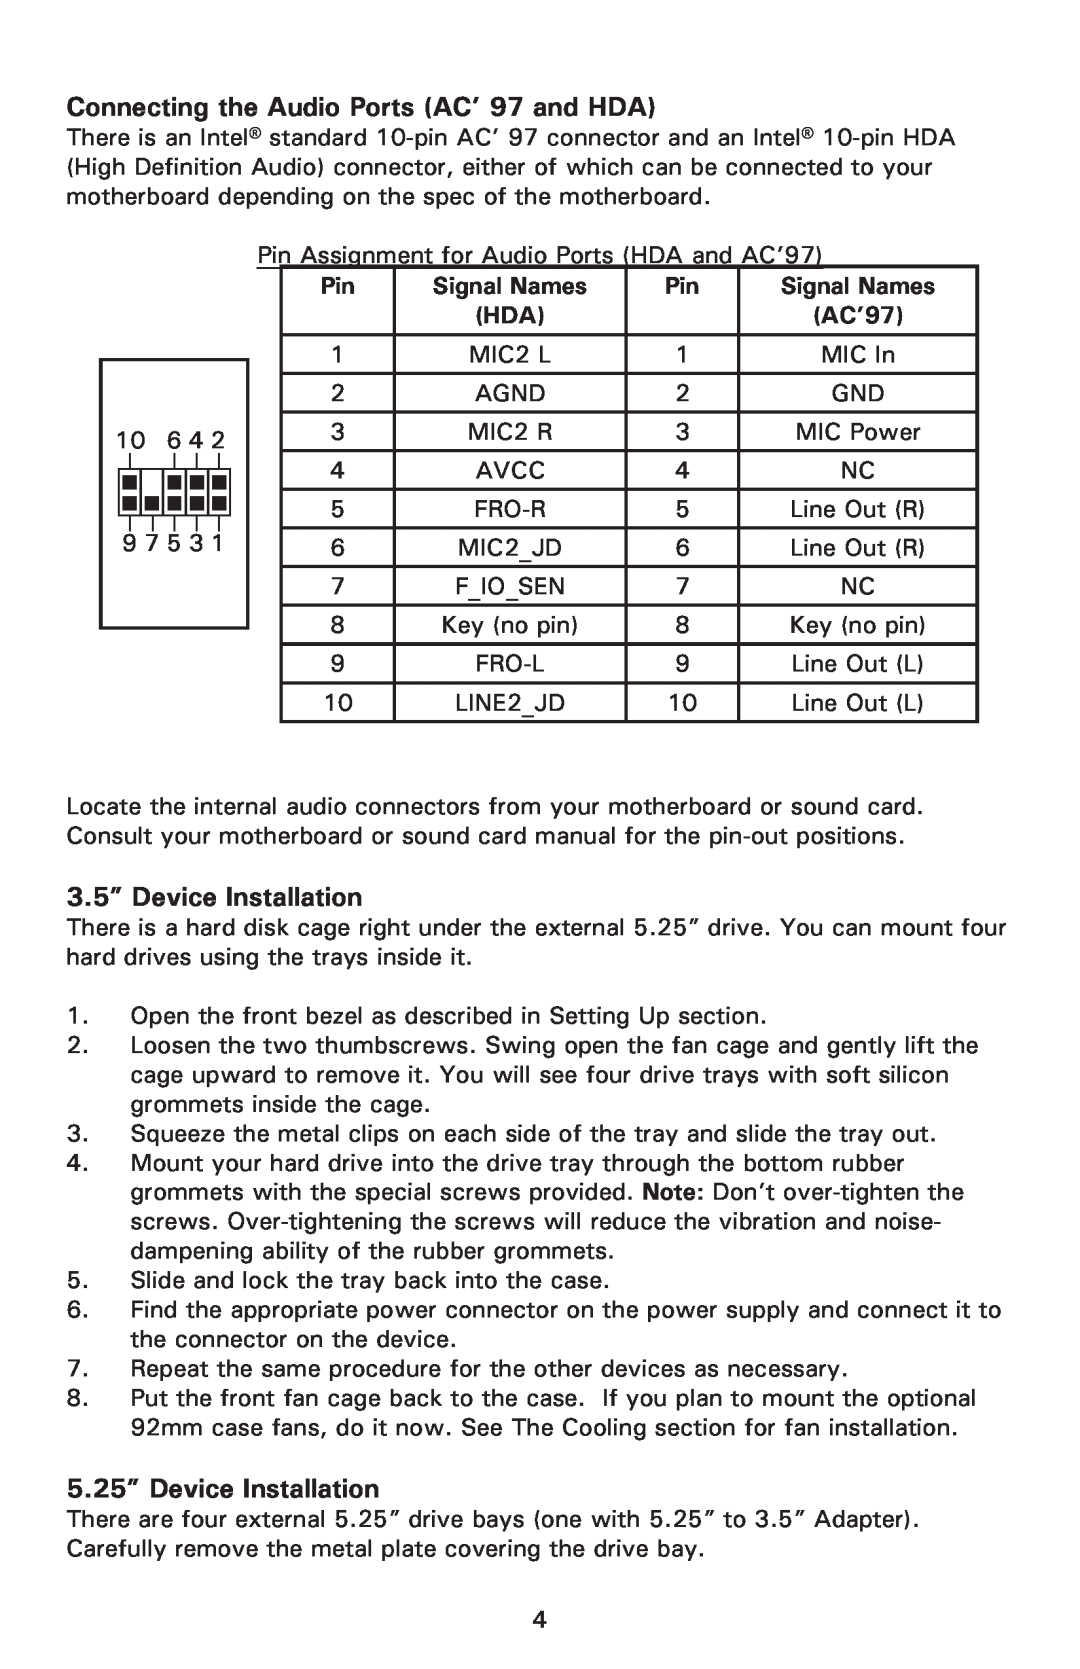 Antec 550 user manual Connecting the Audio Ports AC’ 97 and HDA, 3.5” Device Installation, 5.25” Device Installation, AC’97 